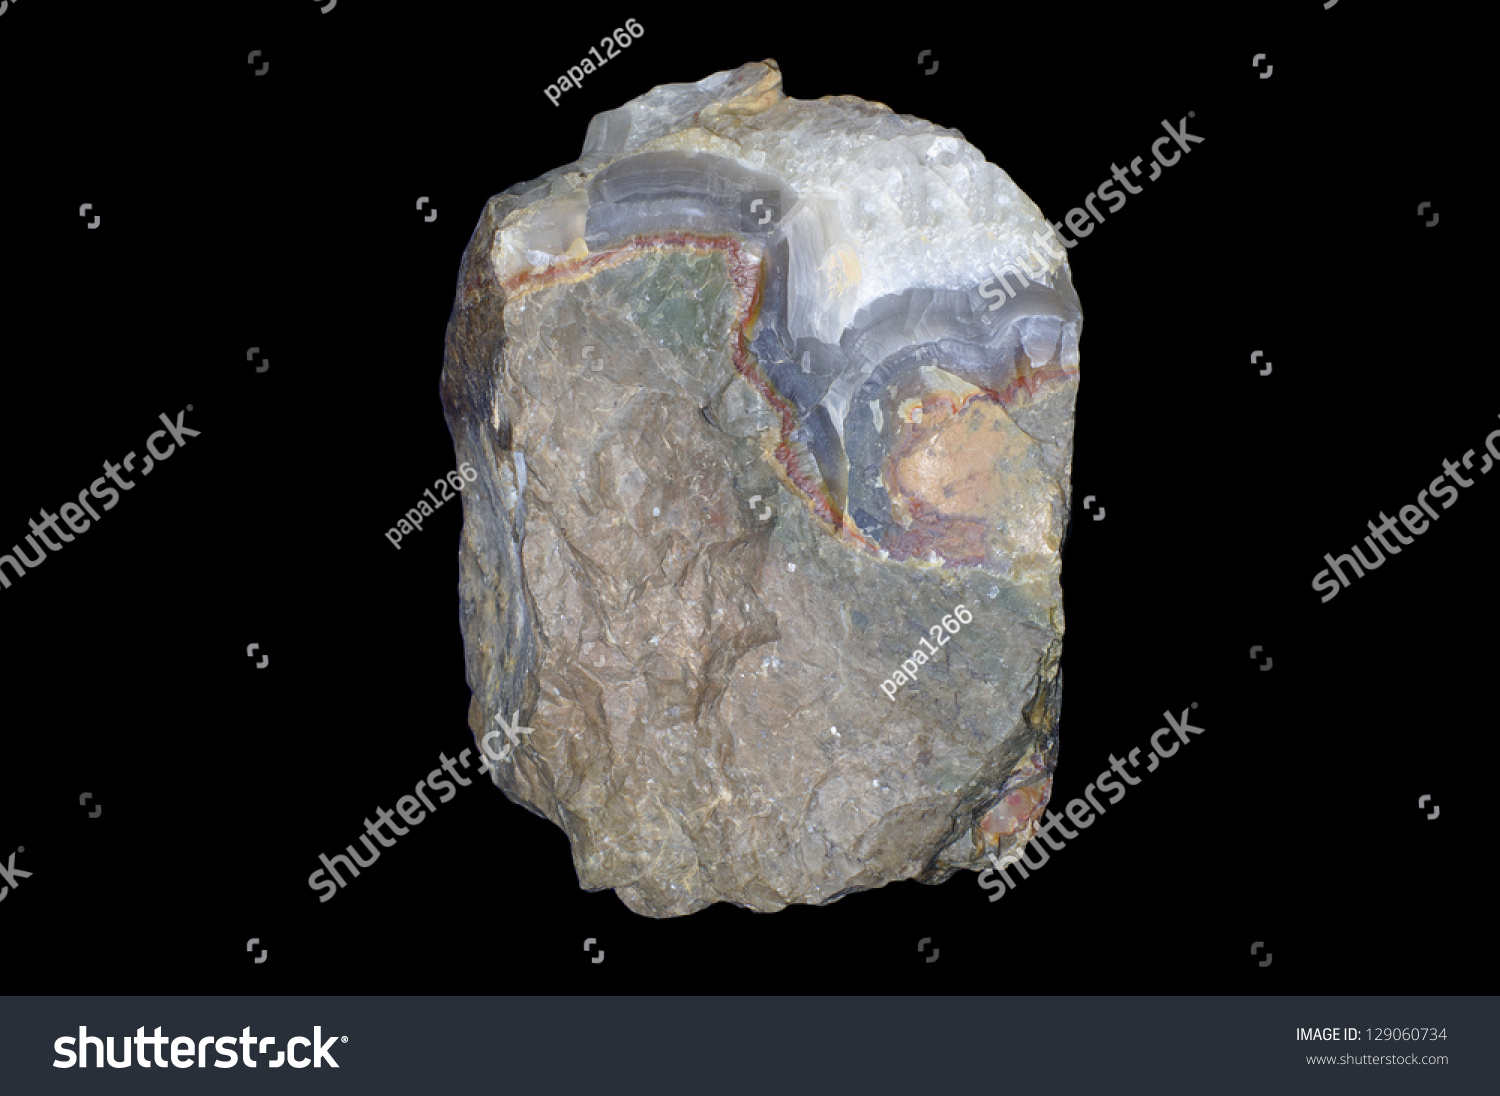 quartz, chalcedony, agate isolated on a black background #129060734